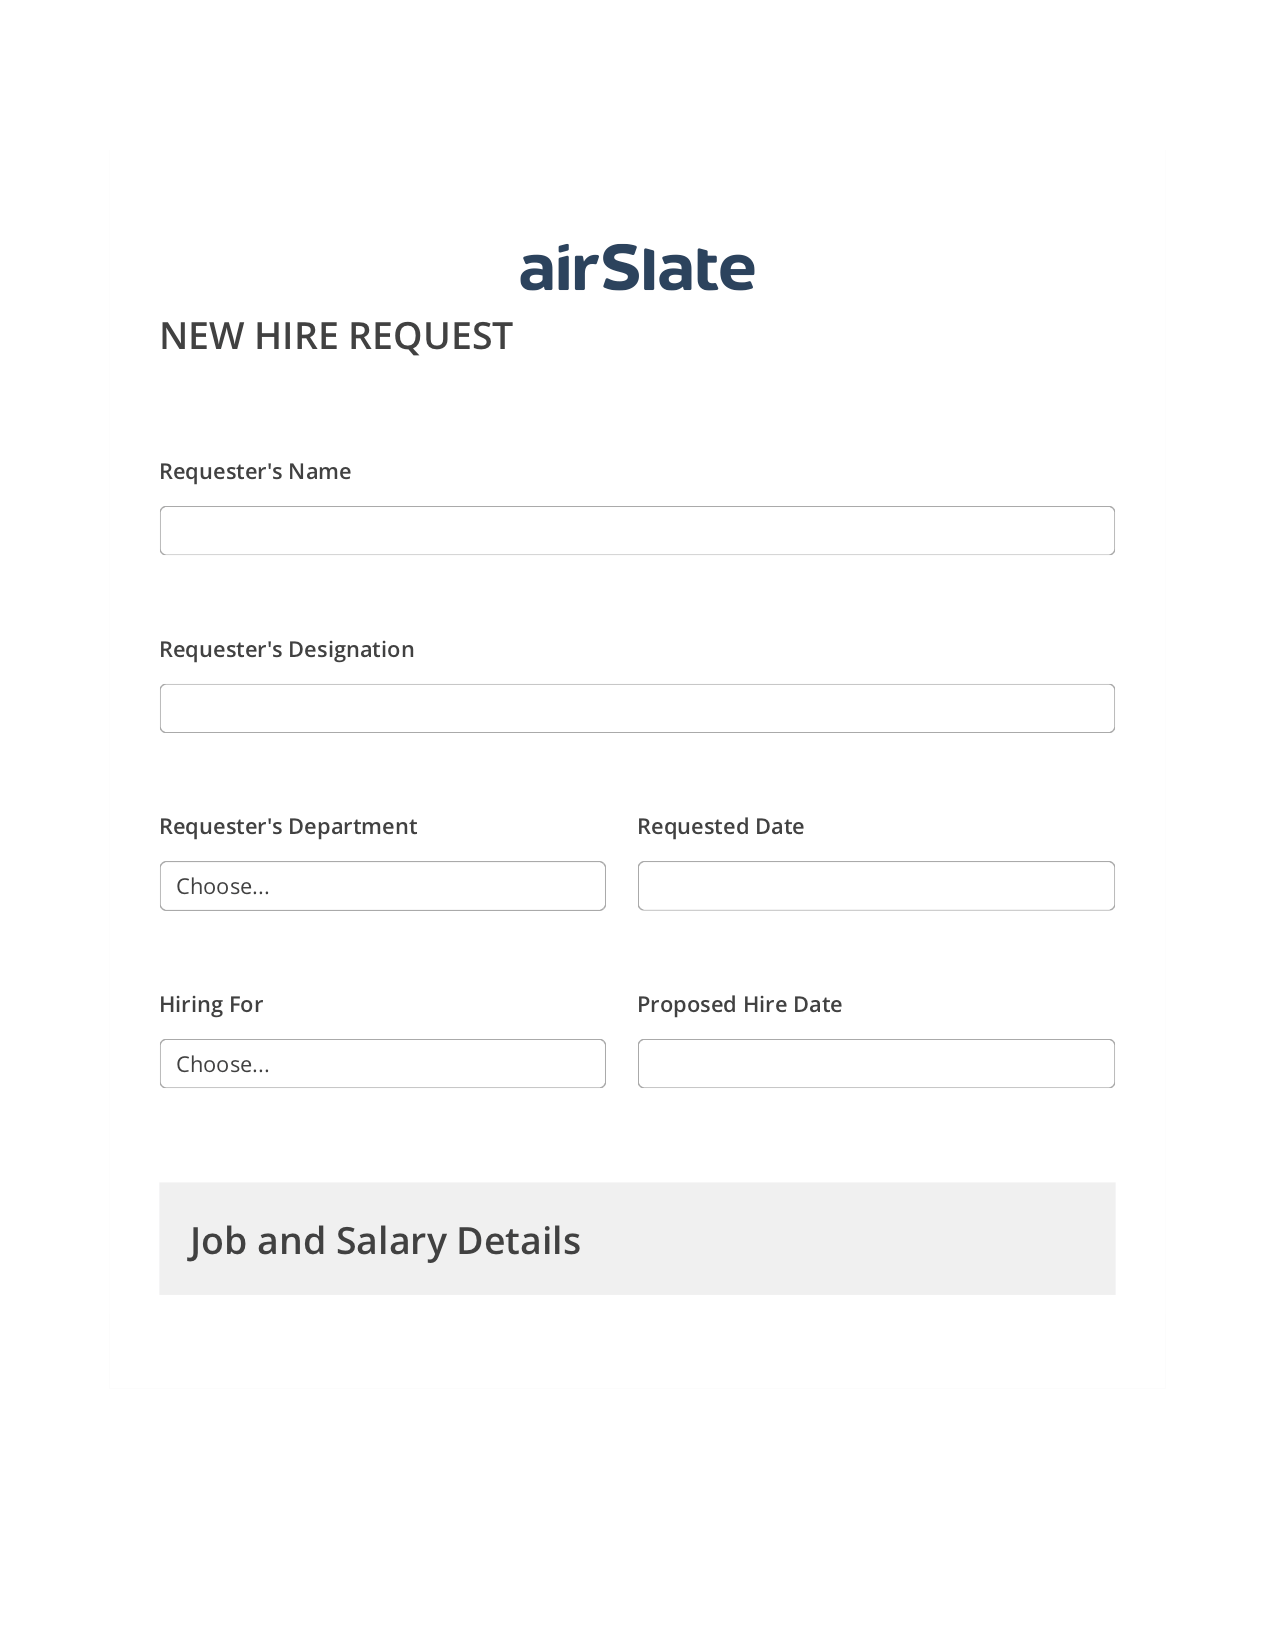 Multirole Hiring Request Workflow Pre-fill from another Slate Bot, Export to MS Dynamics 365 Bot, Export to Salesforce Record Bot